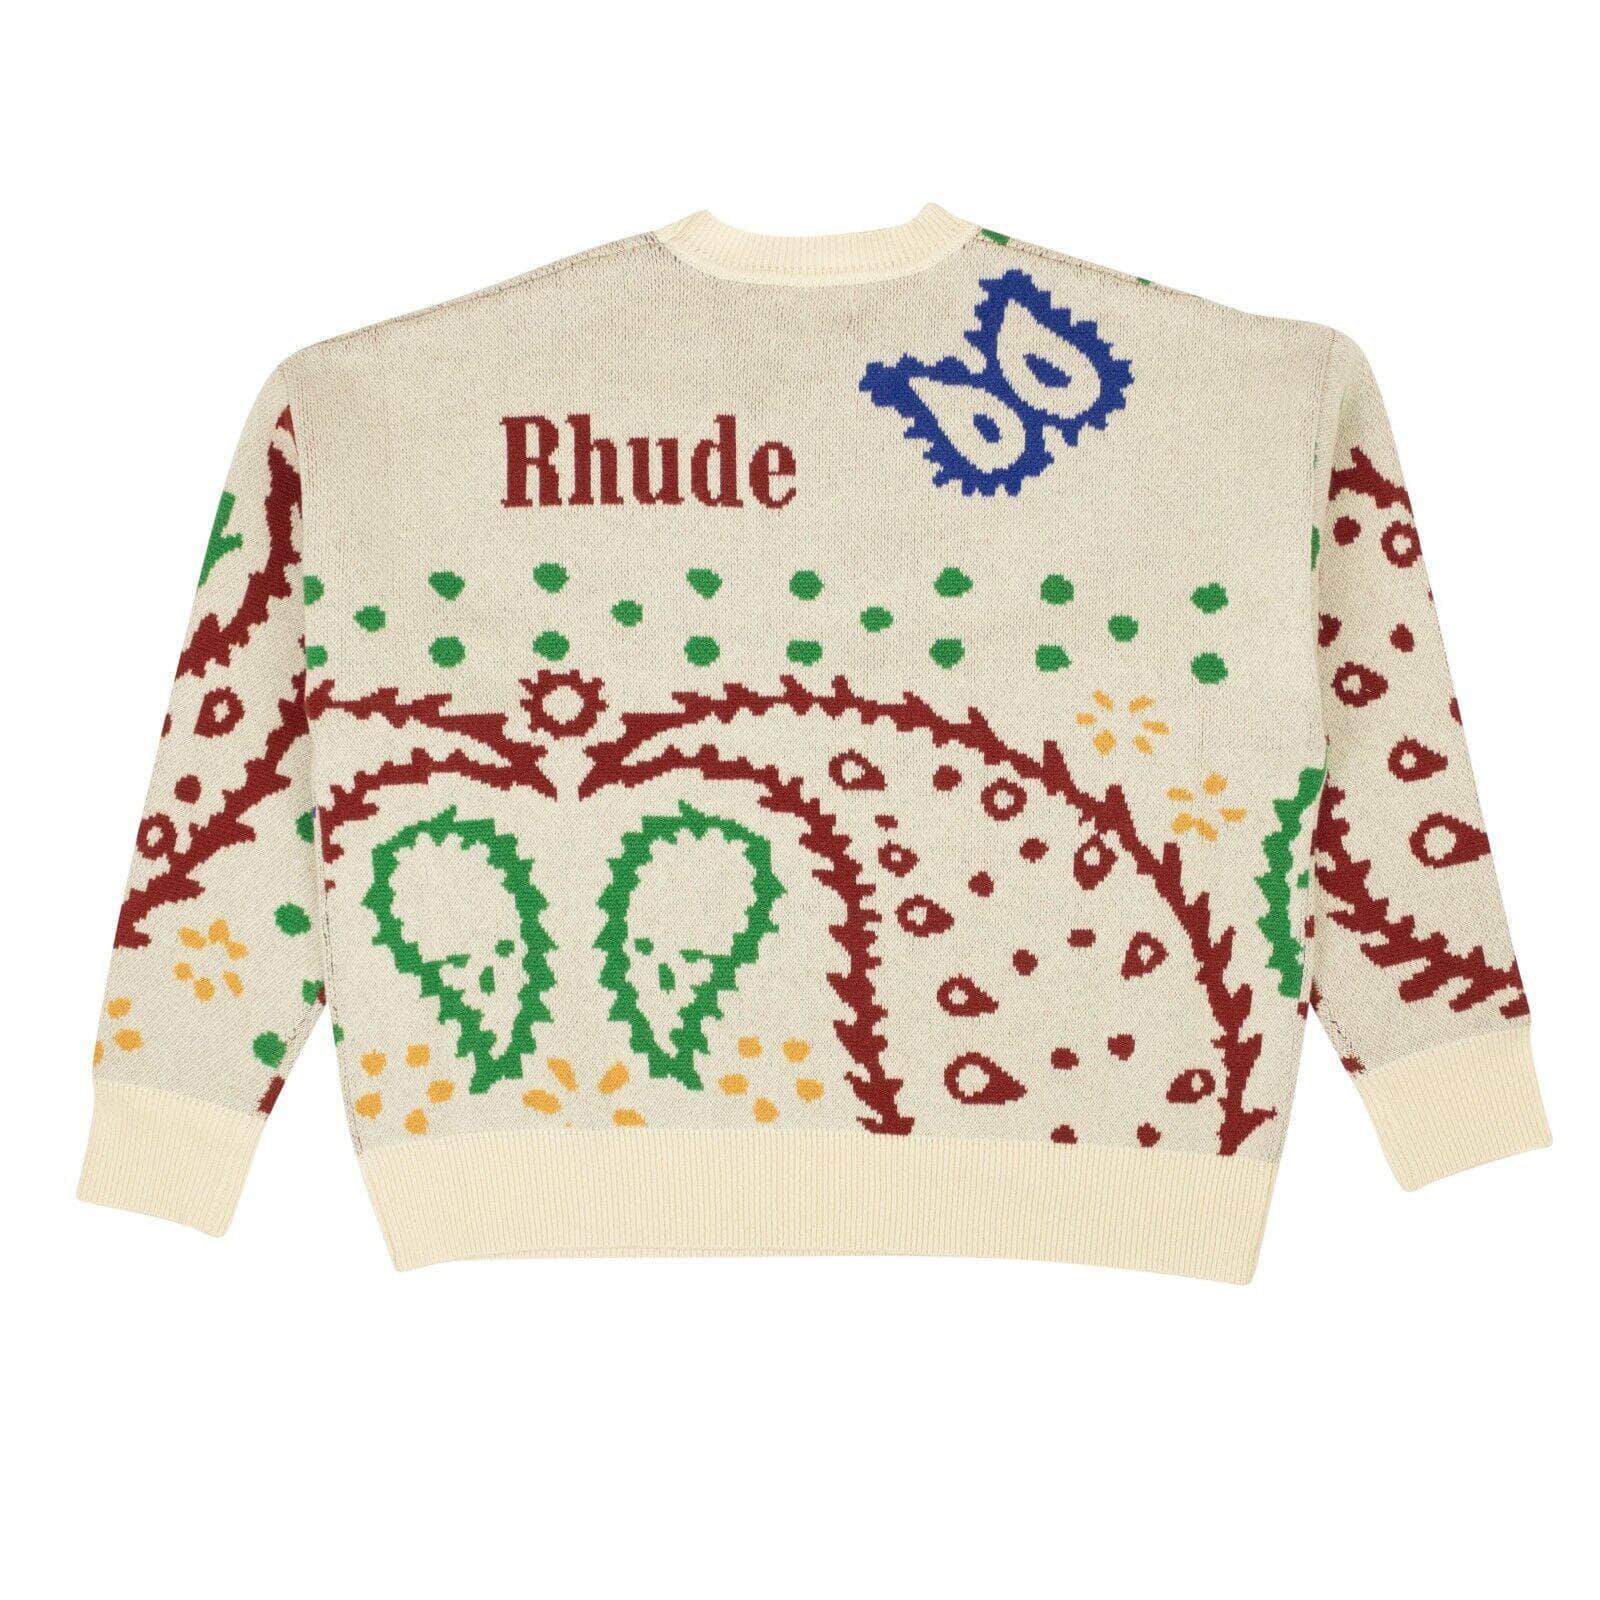 Rhude 750-1000, channelenable-all, chicmi, couponcollection, gender-mens, main-clothing, mens-pullover-sweaters, mens-shoes, rhude, size-m XL / RHD-XTPS-0025/XL Creme And Multicolored Merino Wool Bandana Crewneck RHD-XTPS-0025/XL RHD-XTPS-0025/XL